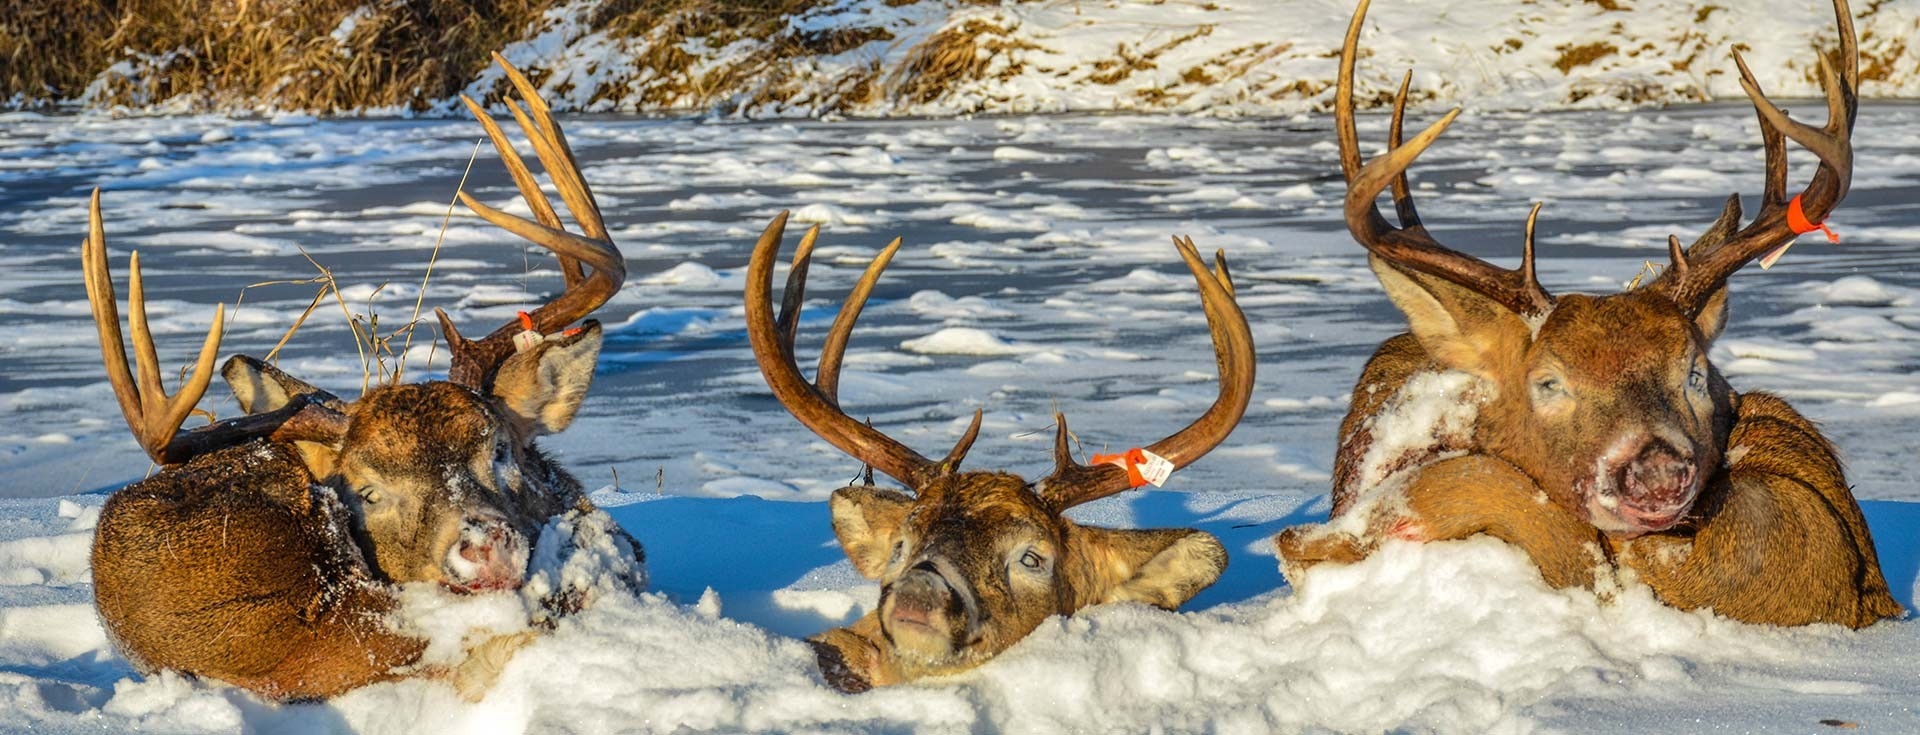 Manitoba Whitetail Hunting | Whitetail Hunts Manitoba Canada - Deer Hunting Outfitter-Huntining The Deer Rut In2021